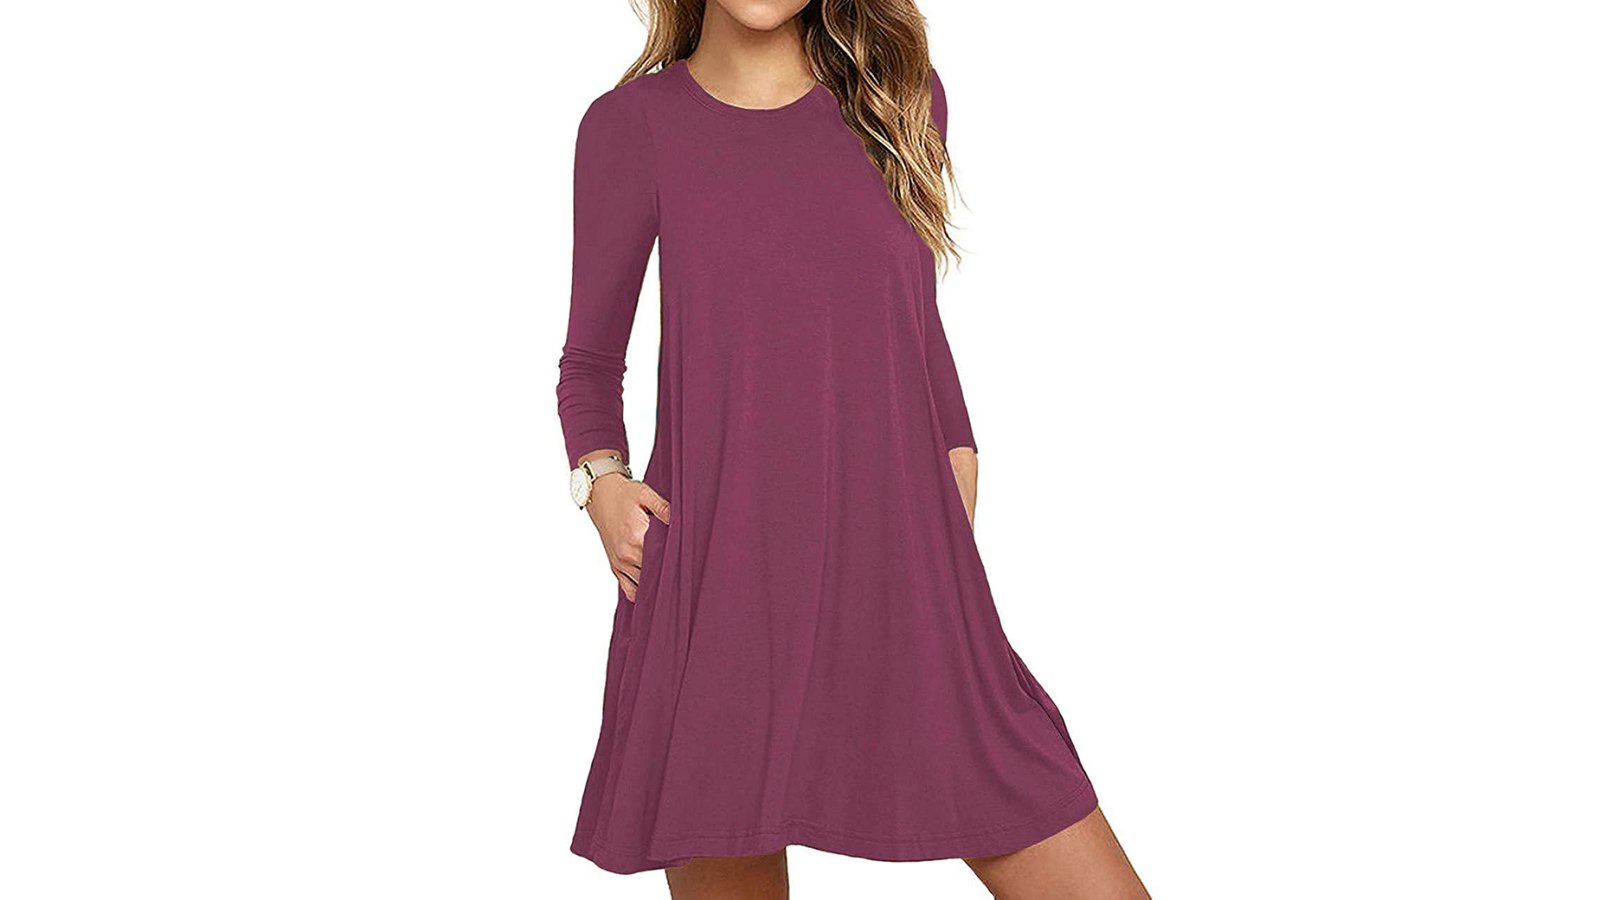 Unbranded T-Shirt Dress Can Be Styled Any Way You Want | Us Weekly